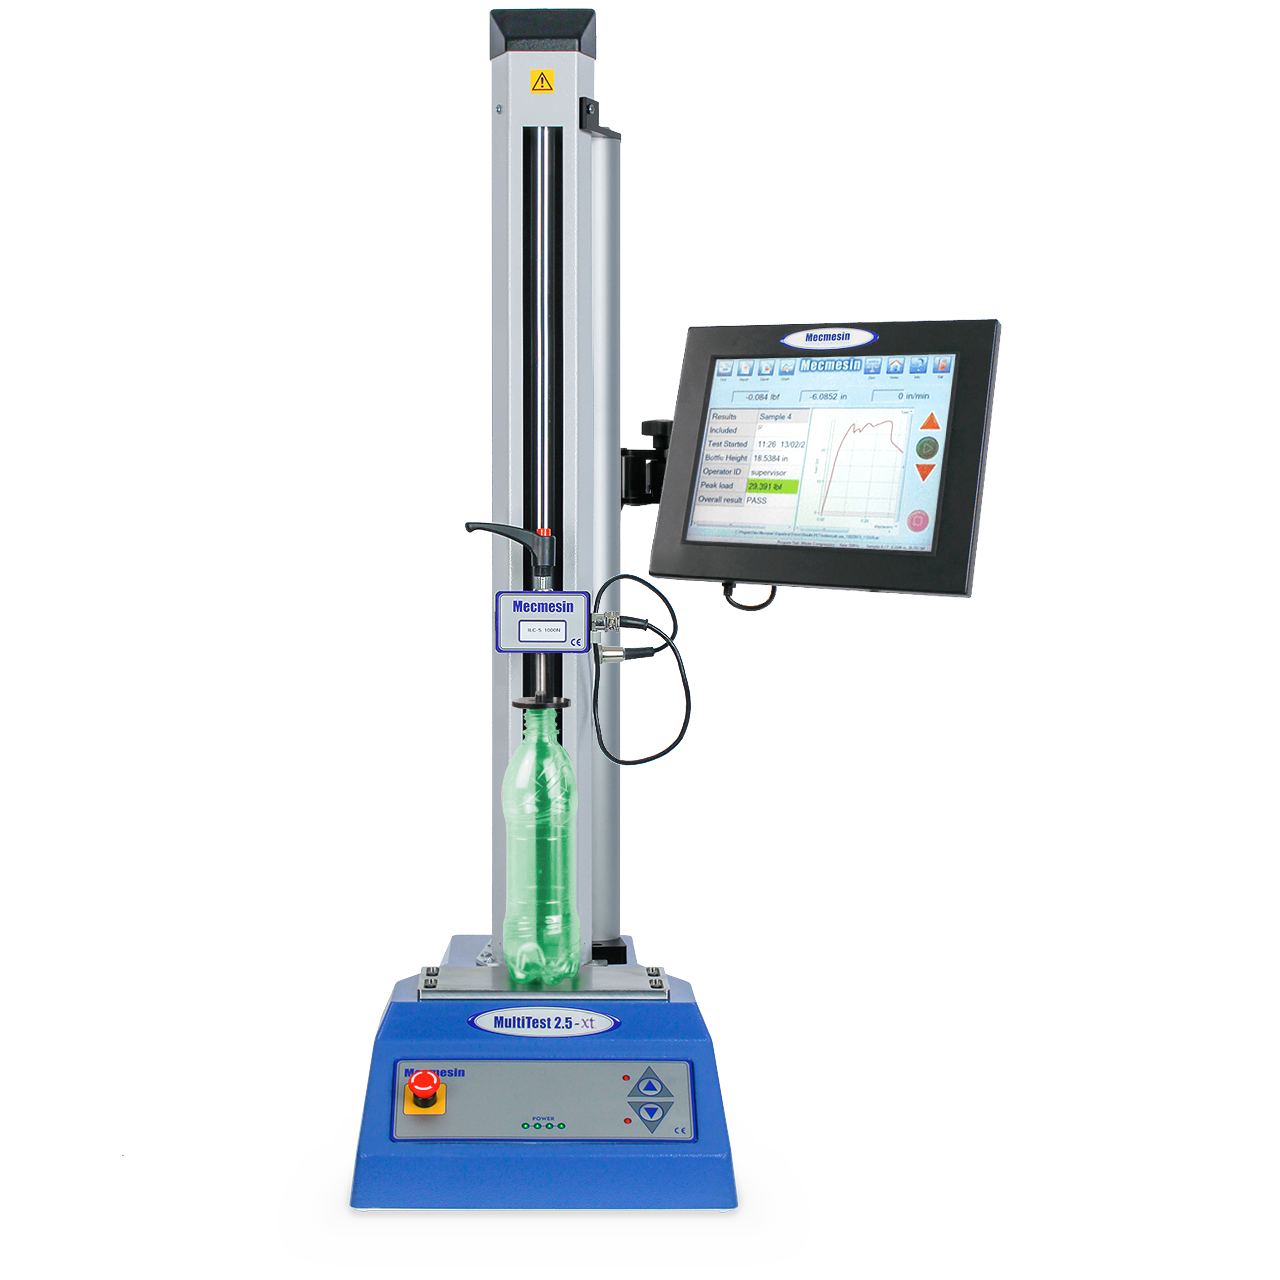 MultiTest-xt single-column (0.5-5 kN) tensile testing machine, shown with touchscreen console